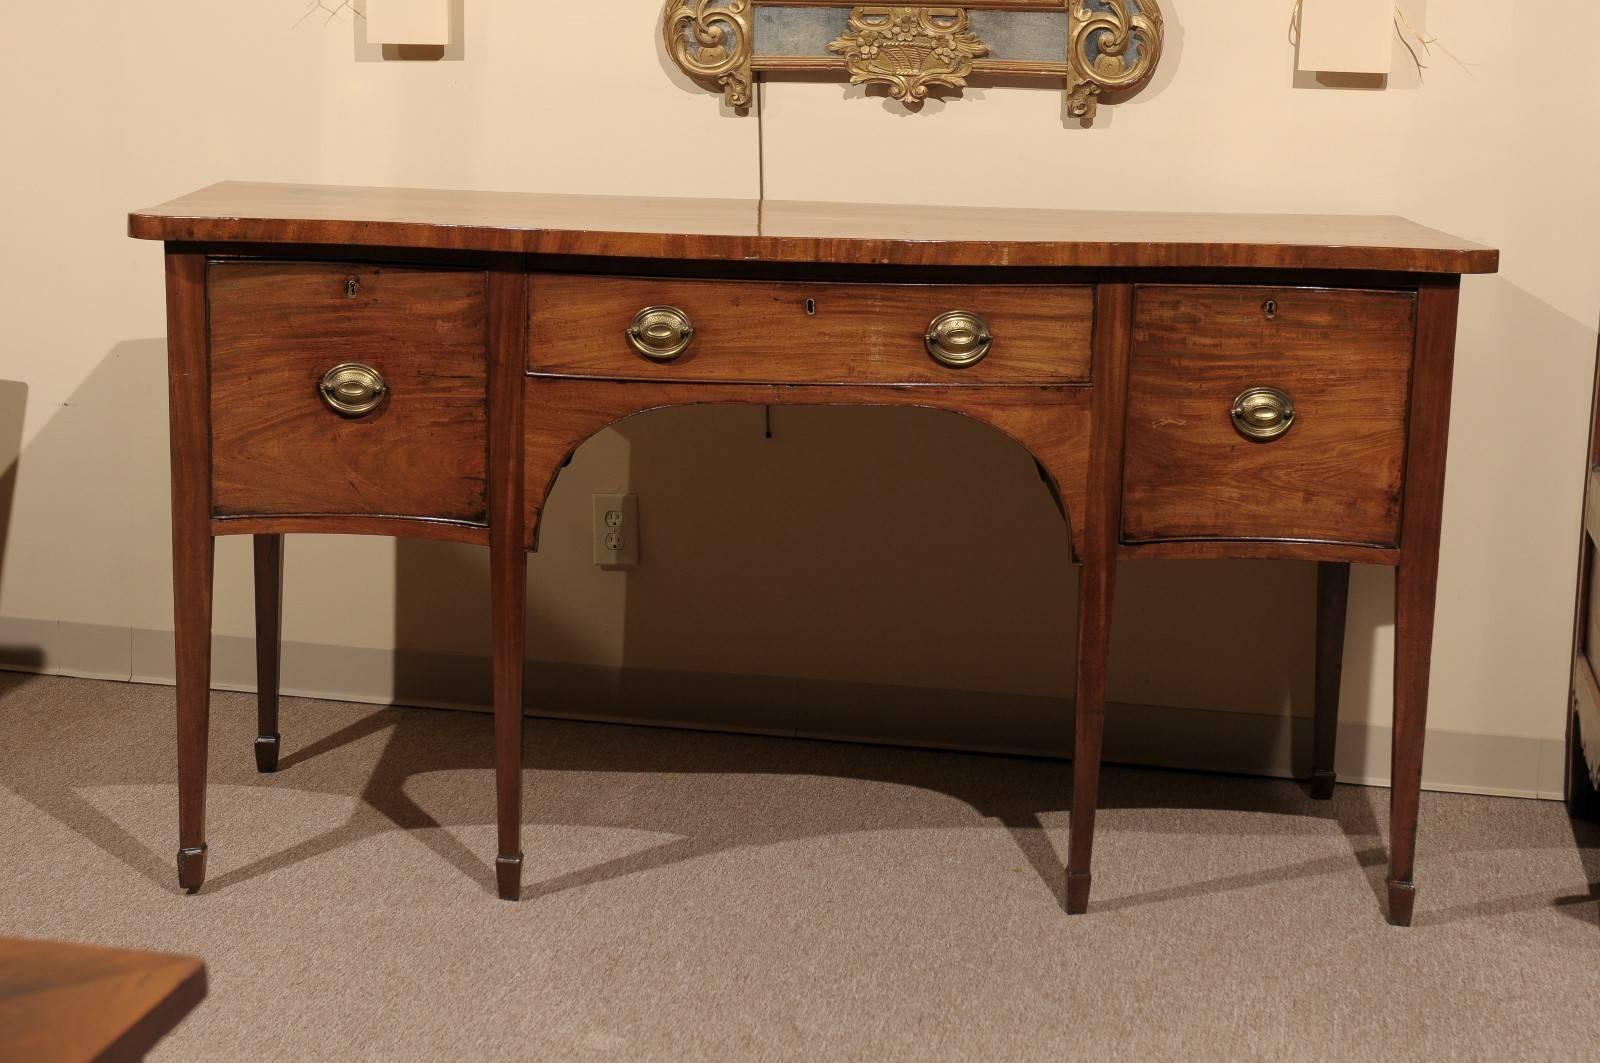 English George III mahogany sideboard with spade feet and serpentine front, circa 1790.